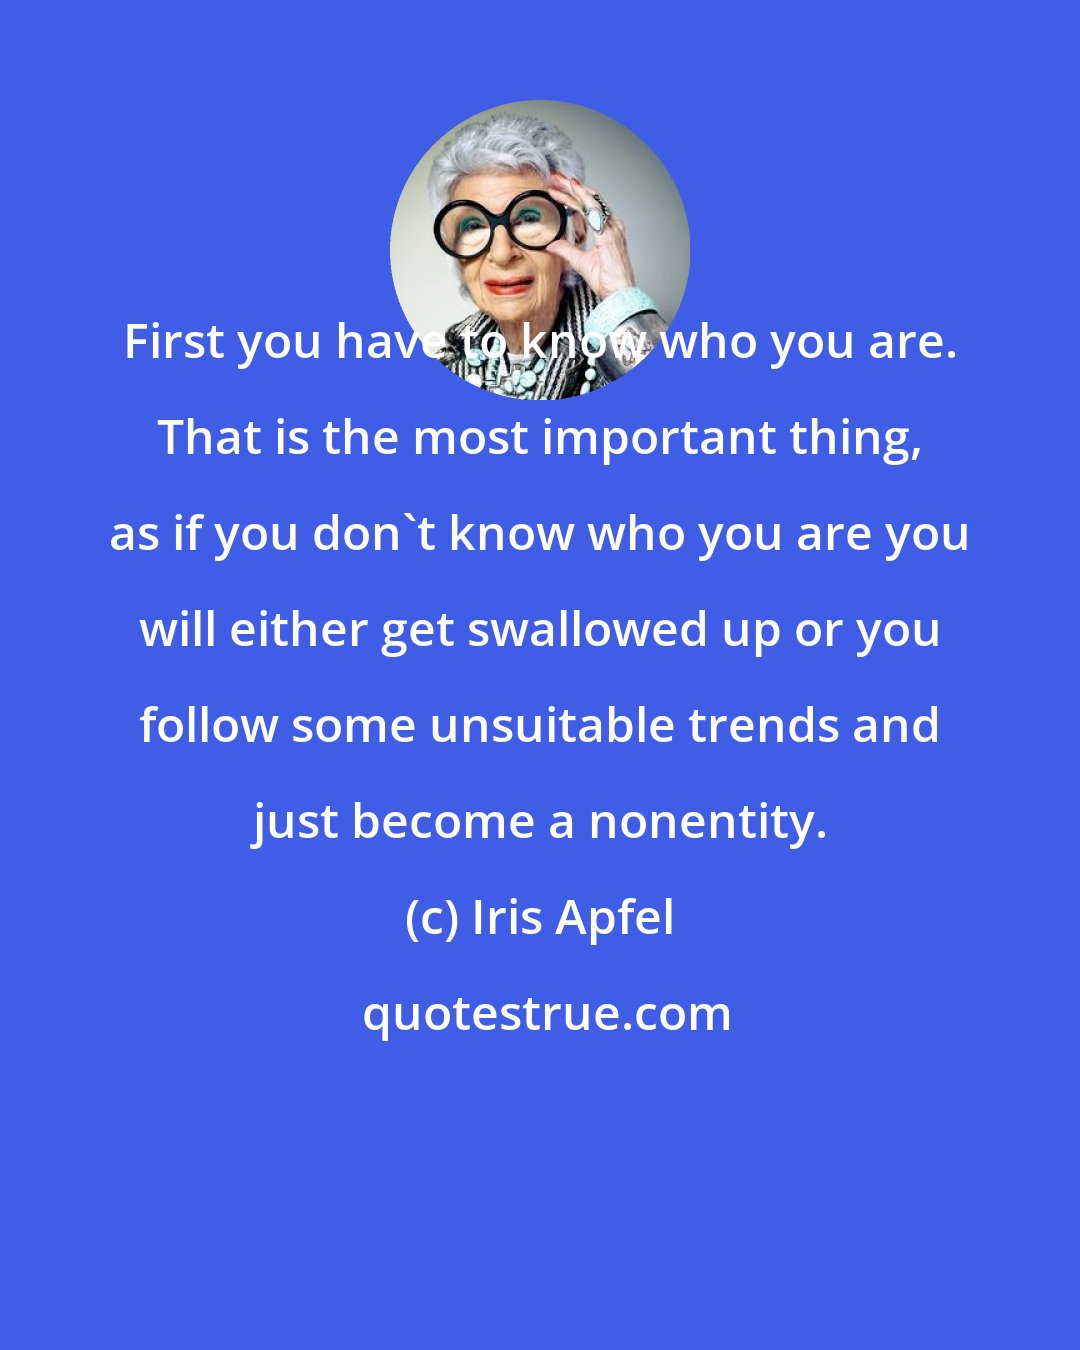 Iris Apfel: First you have to know who you are. That is the most important thing, as if you don't know who you are you will either get swallowed up or you follow some unsuitable trends and just become a nonentity.